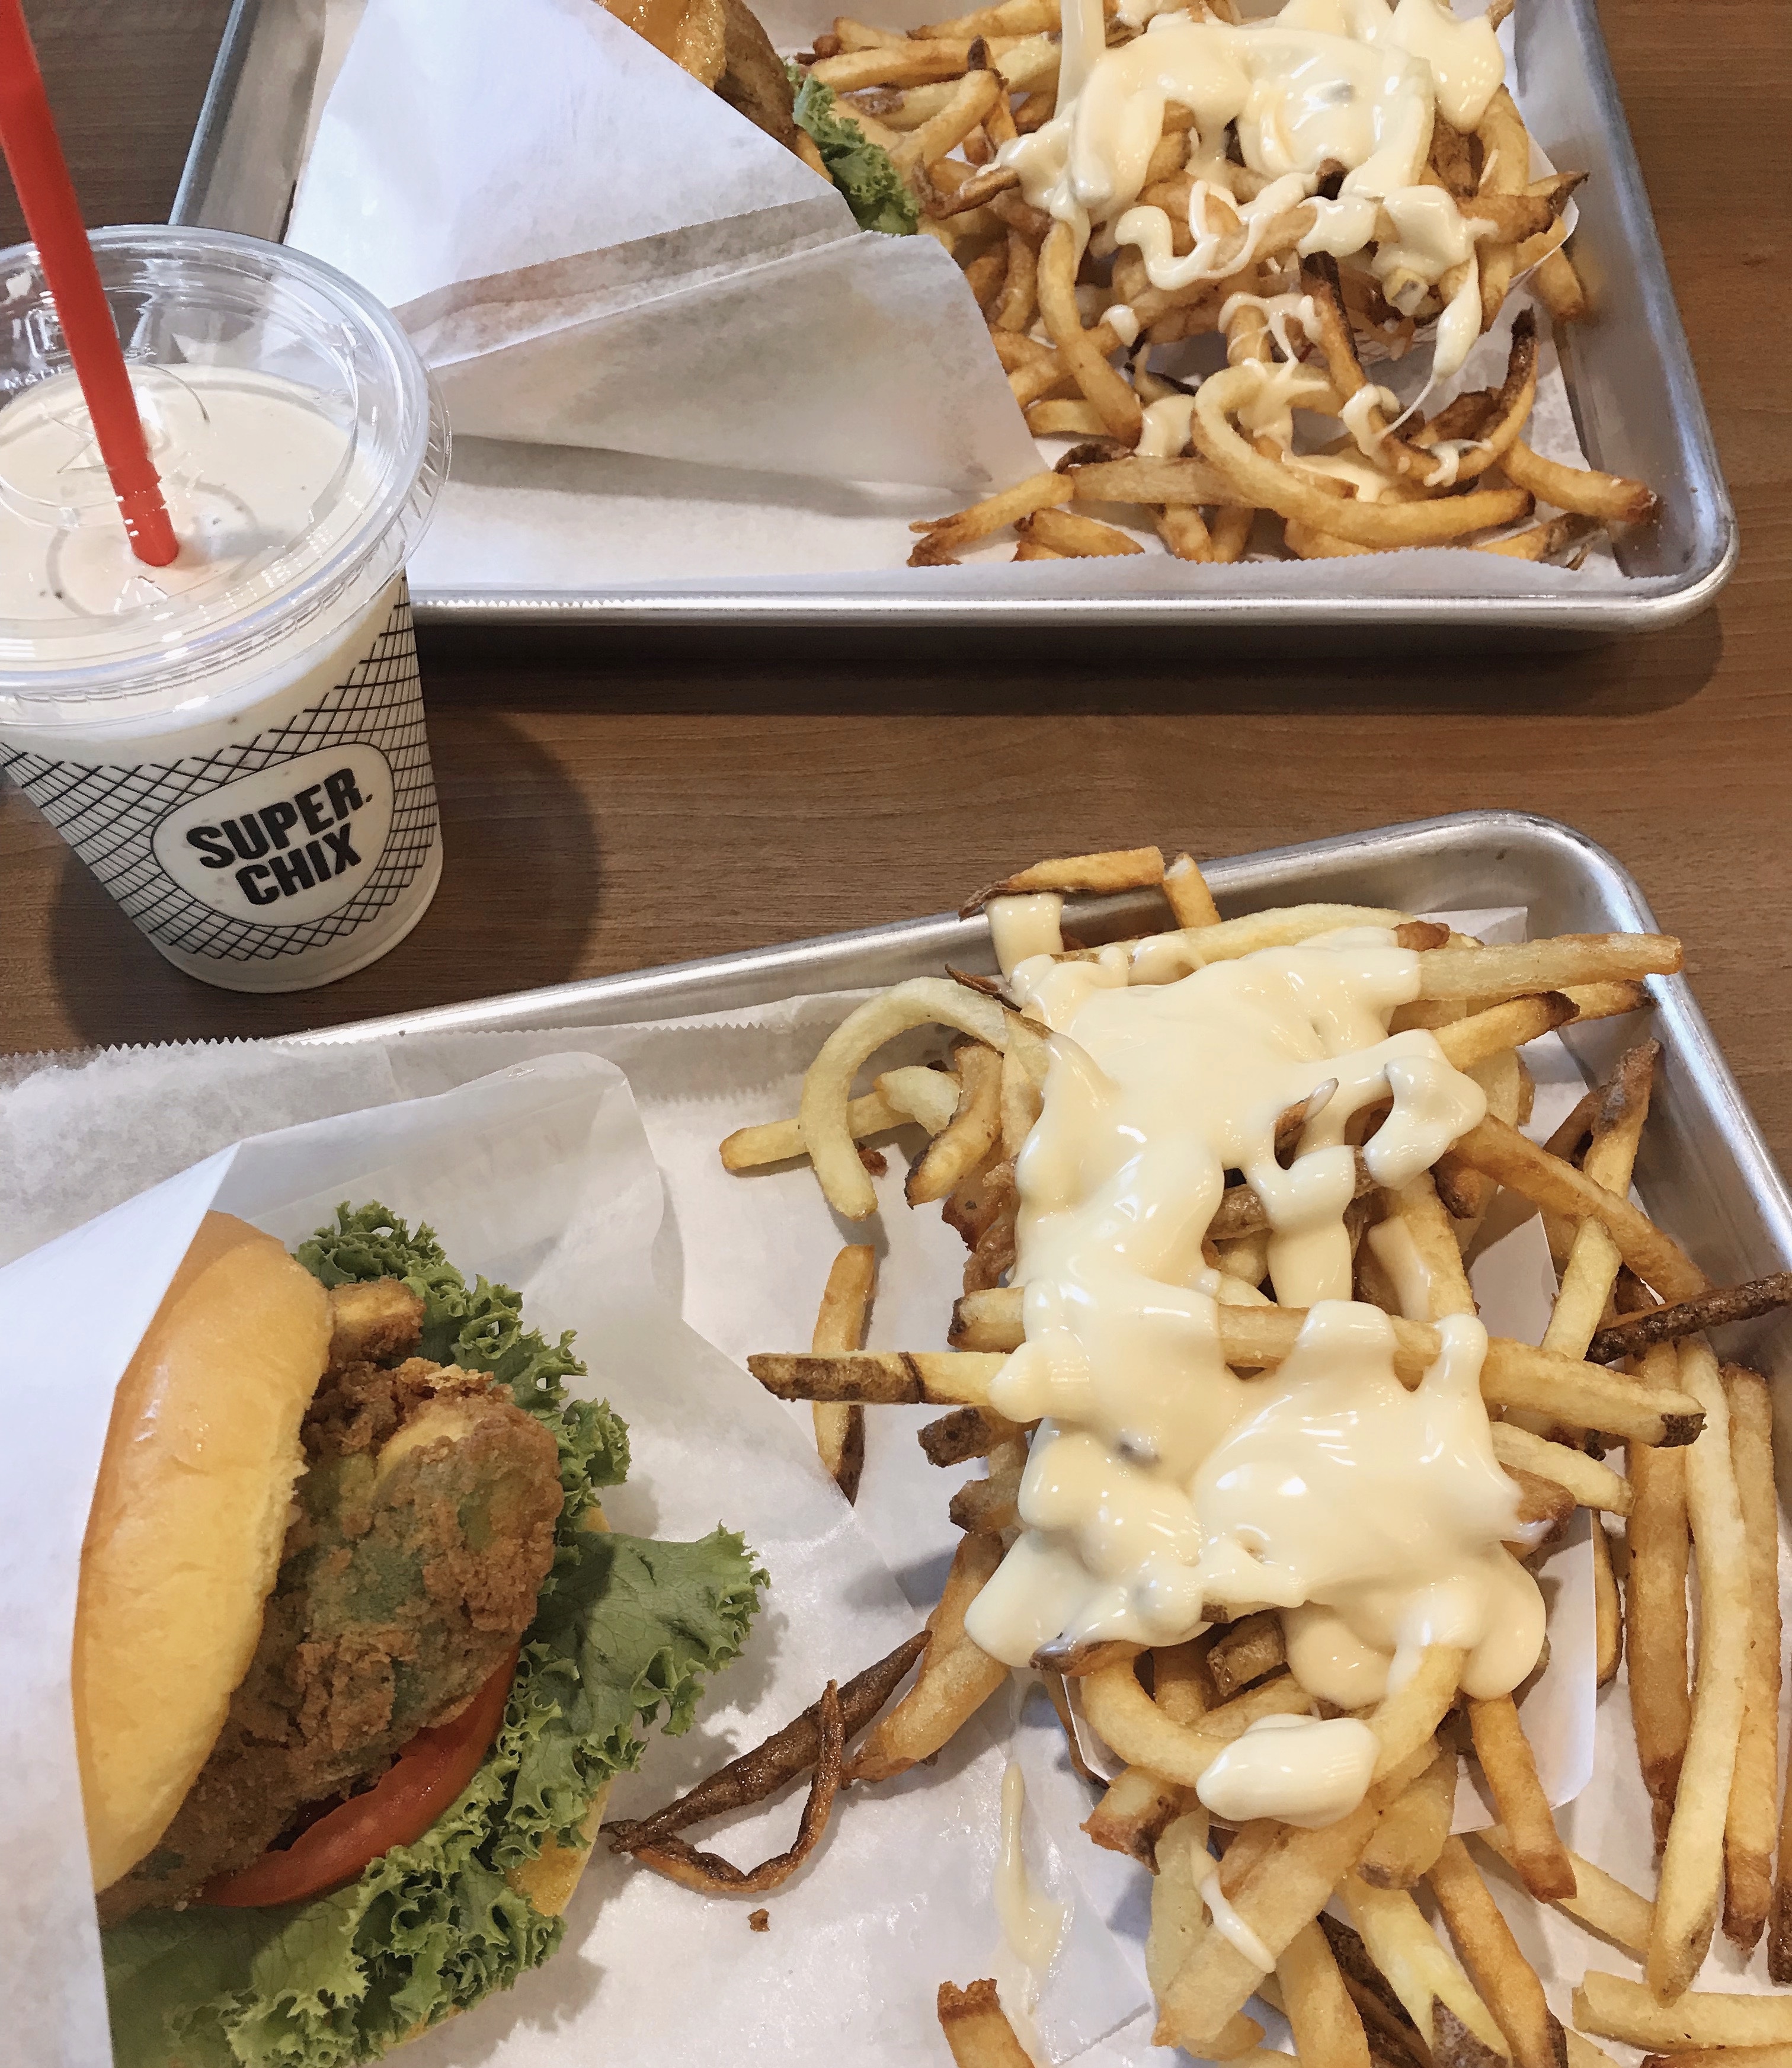 Chicken Sandwich and fries from Super Chix